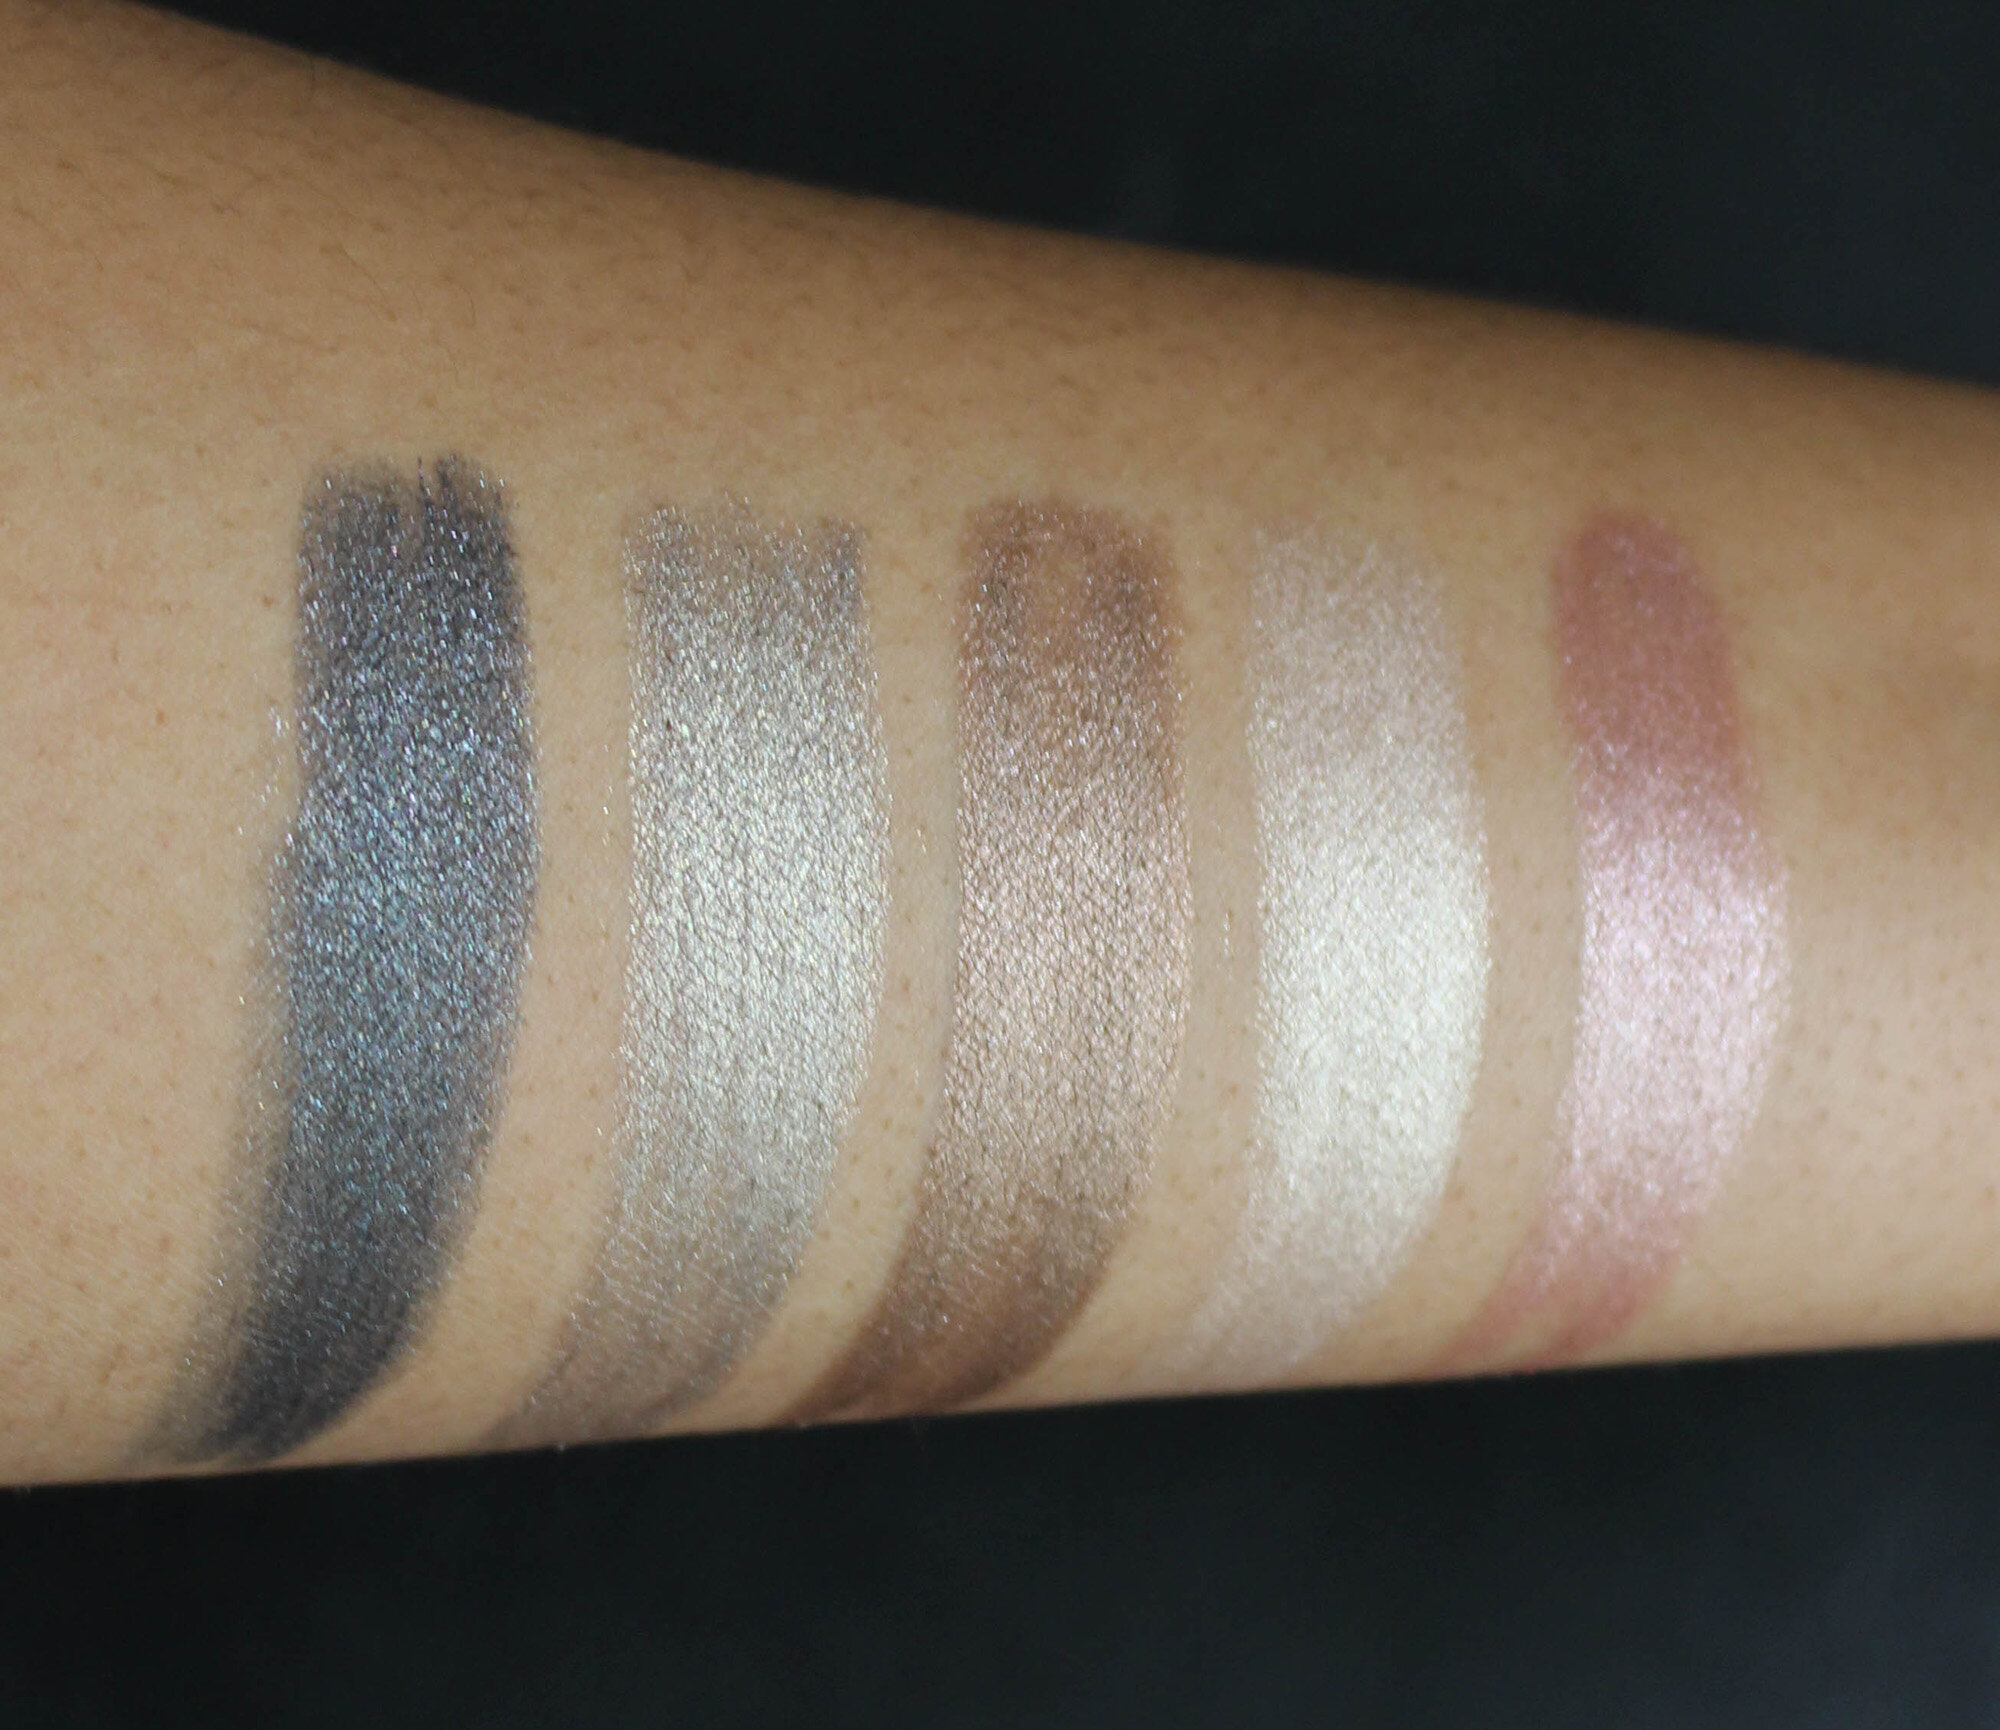 Swatches of the By Terry Ombre Blackstar (L to R): Black Pearl, Ombre Mercure, Bronze Moon, Blond Opal, Frozen Quartz.